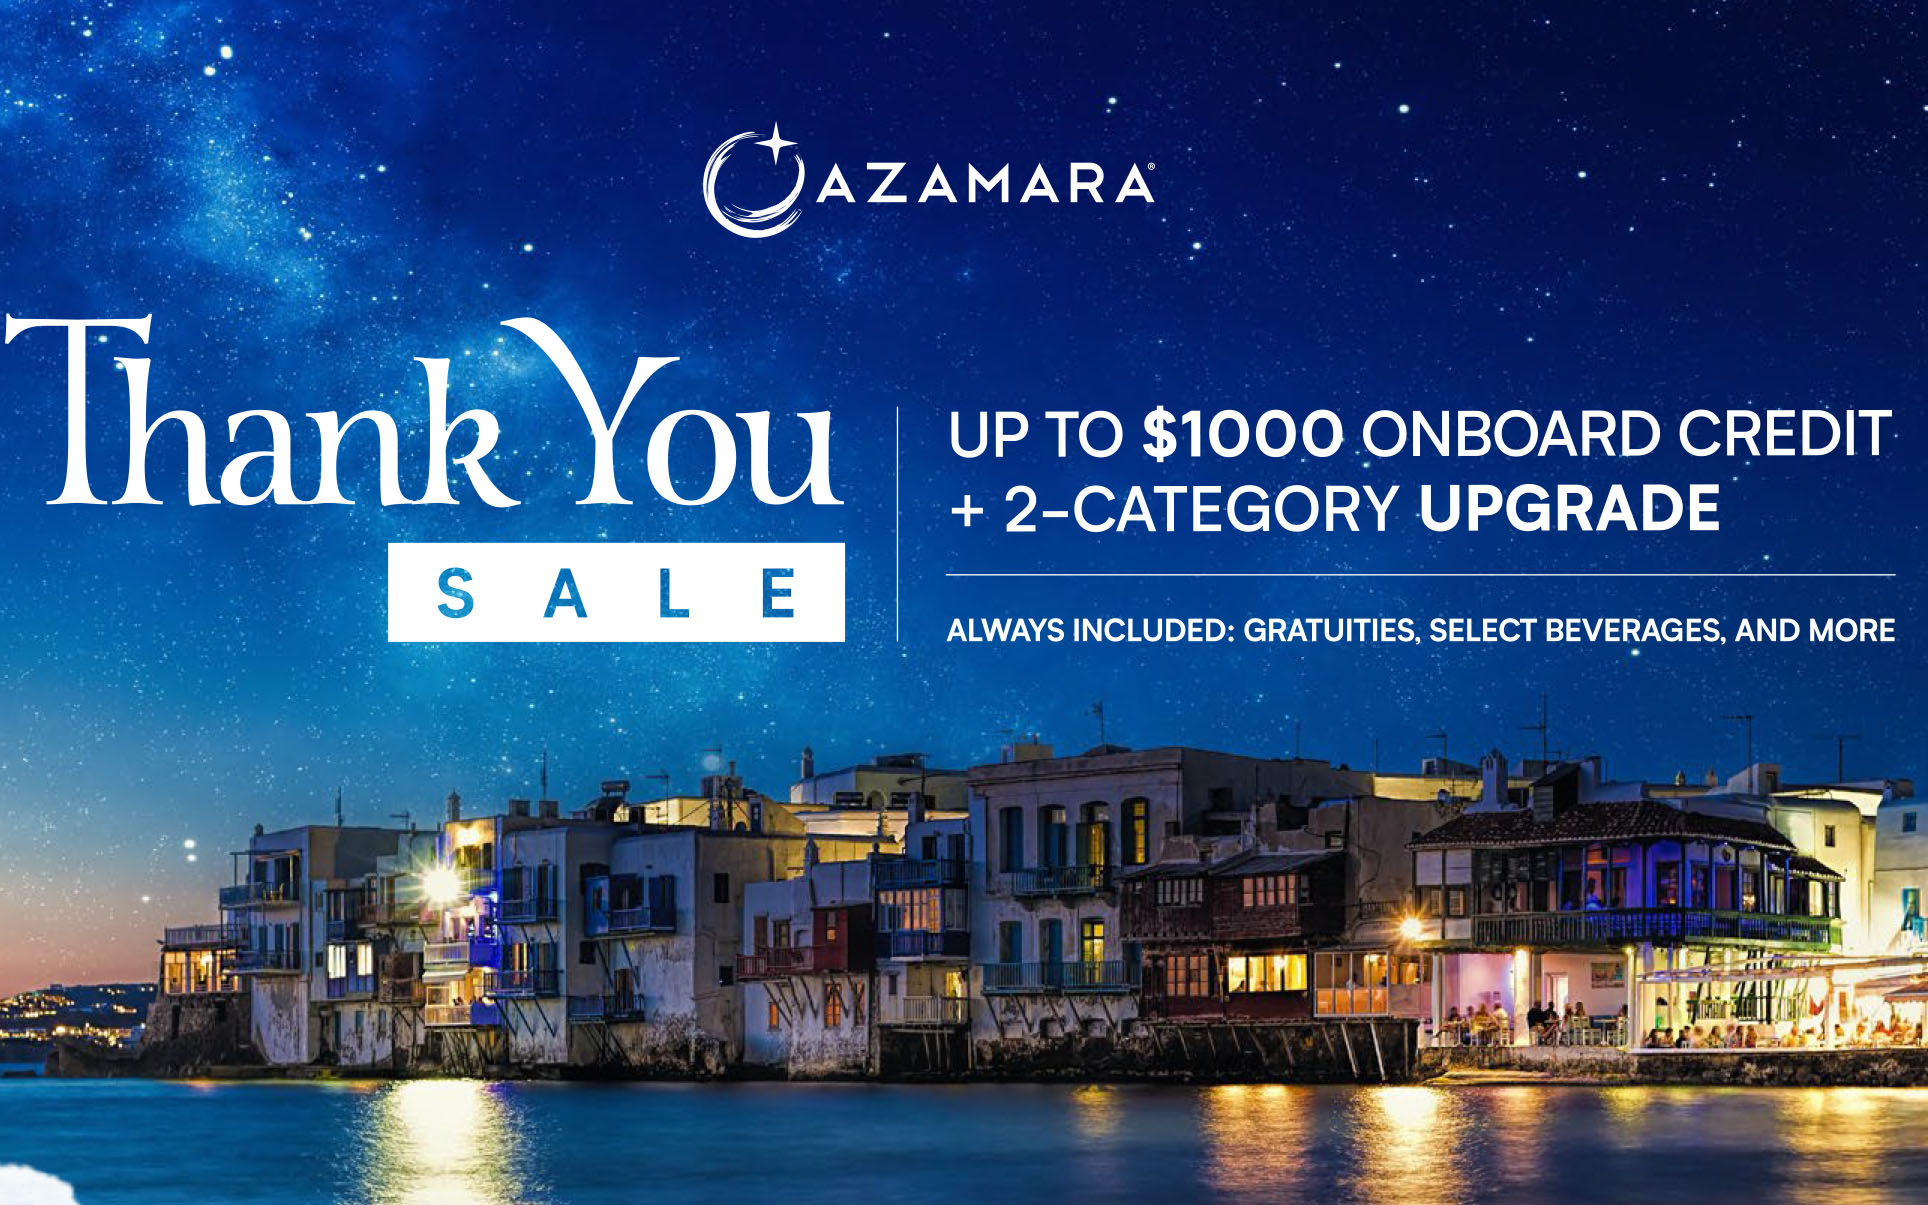 Azamara Thank You Sale - Up to $1,000 Onboard Credit + 2-Category Upgrade